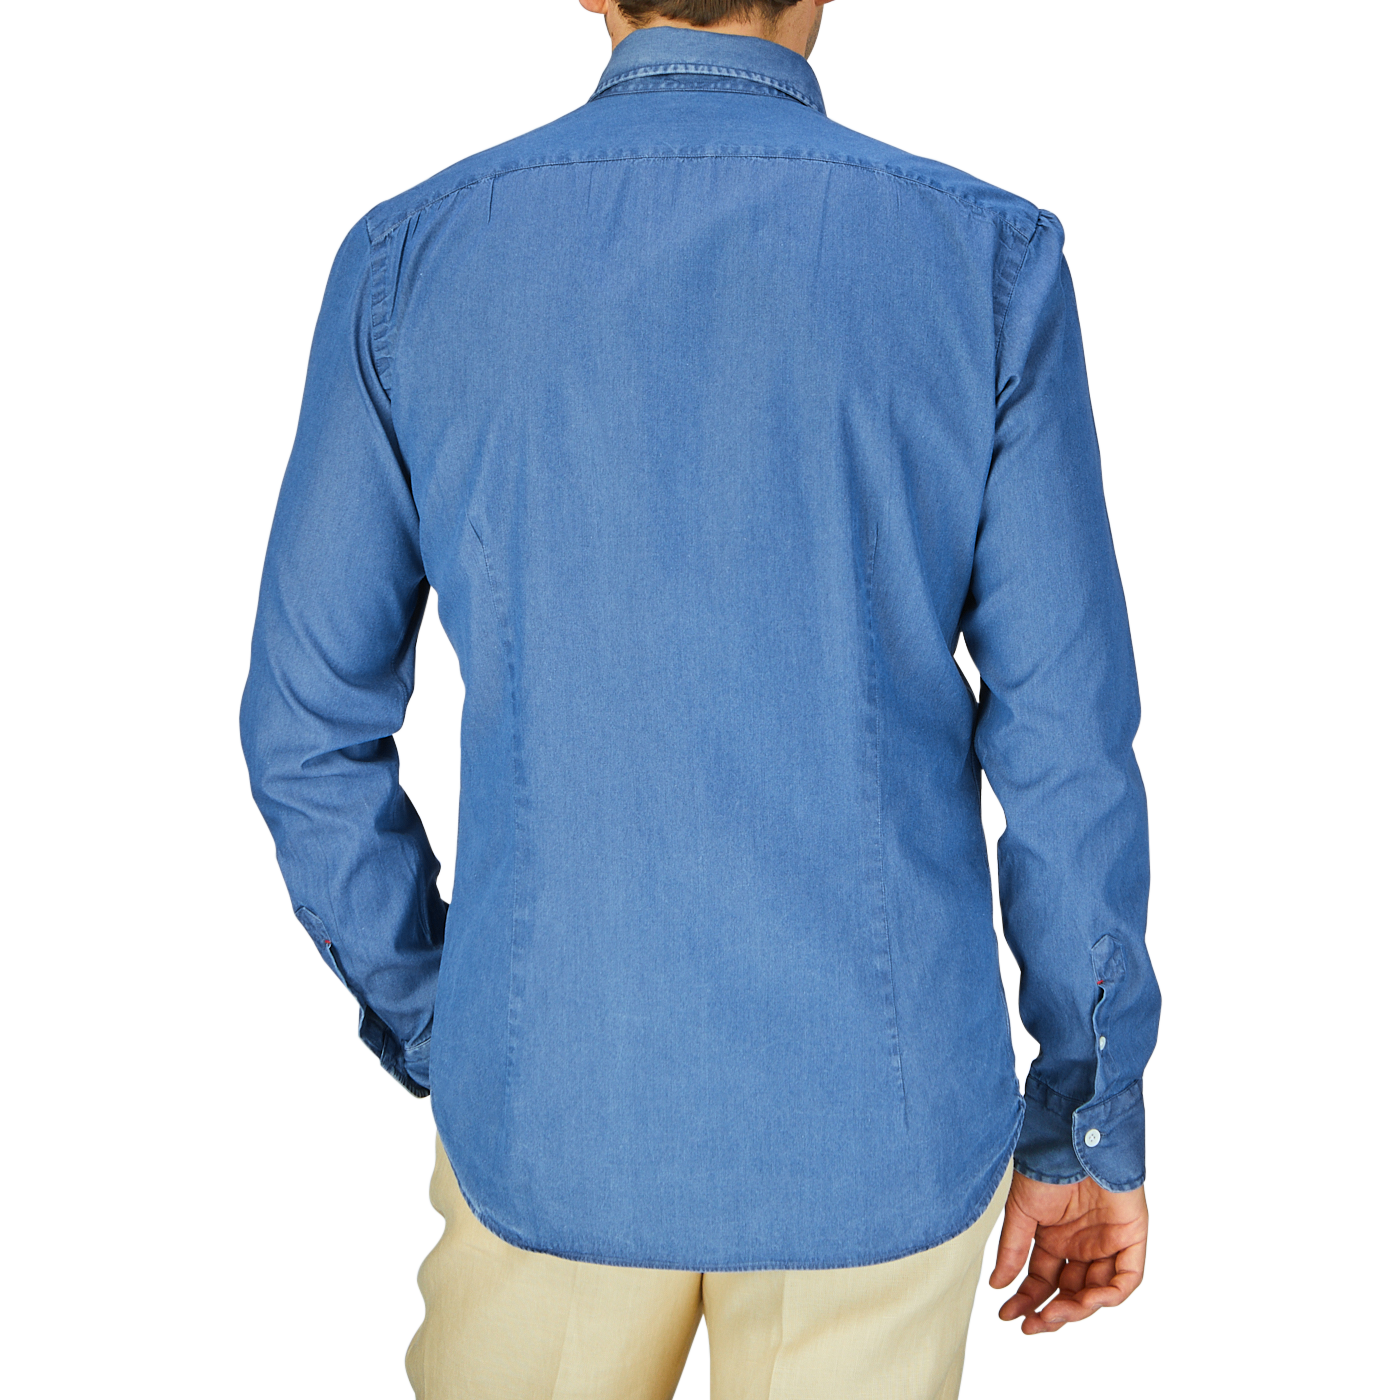 A person standing with their back to the camera, wearing a Dark Denim Washed Cotton BD Regular Fit Shirt by Mazzarelli and beige pants.